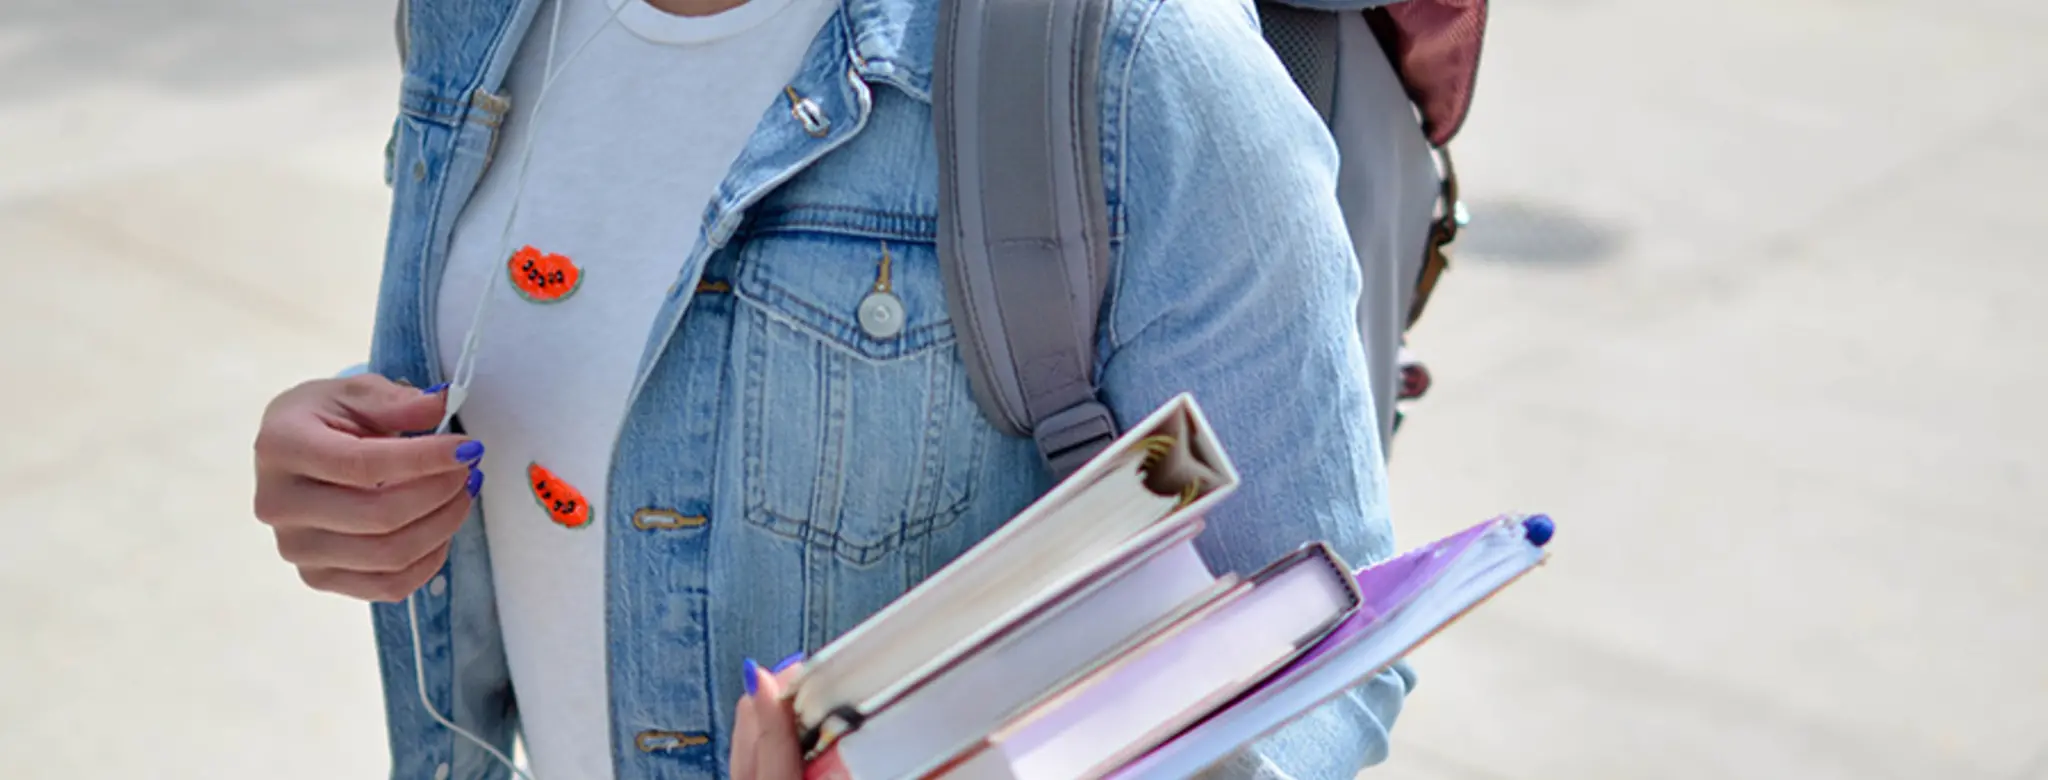 Denver college student with backpack and textbooks